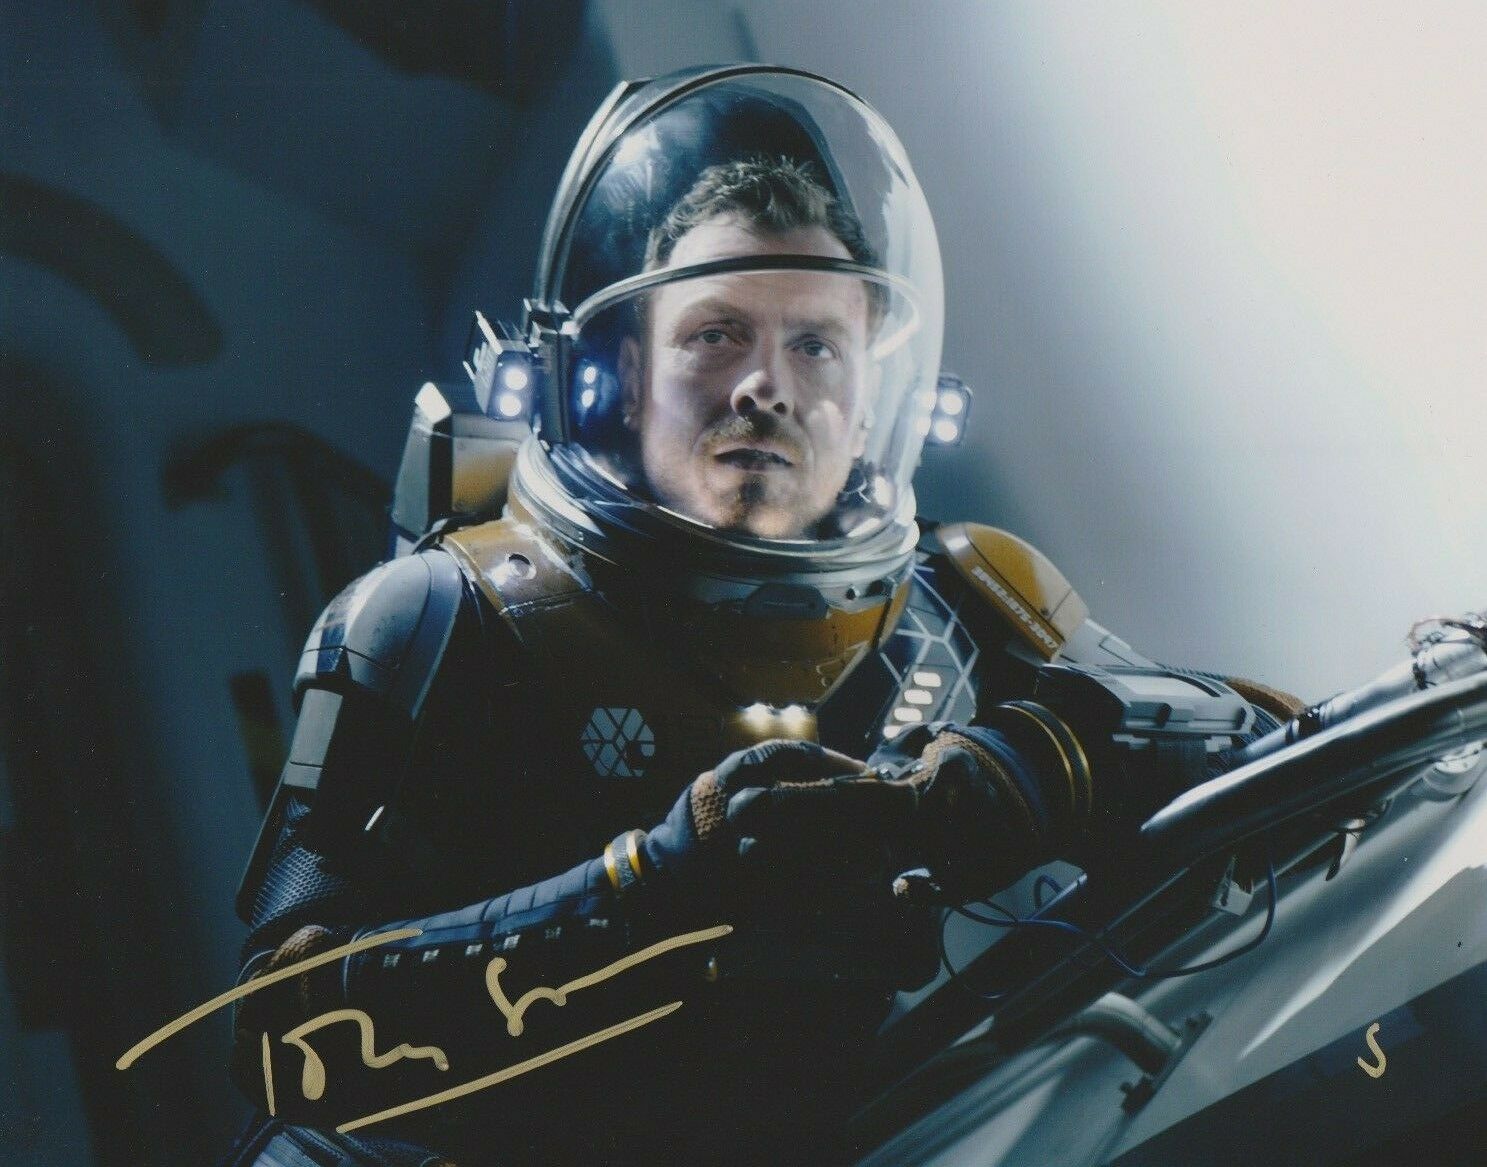 Toby Stephens Lost In Space Signed Autograph 8x10 Photo #6 - Outlaw Hobbies Authentic Autographs